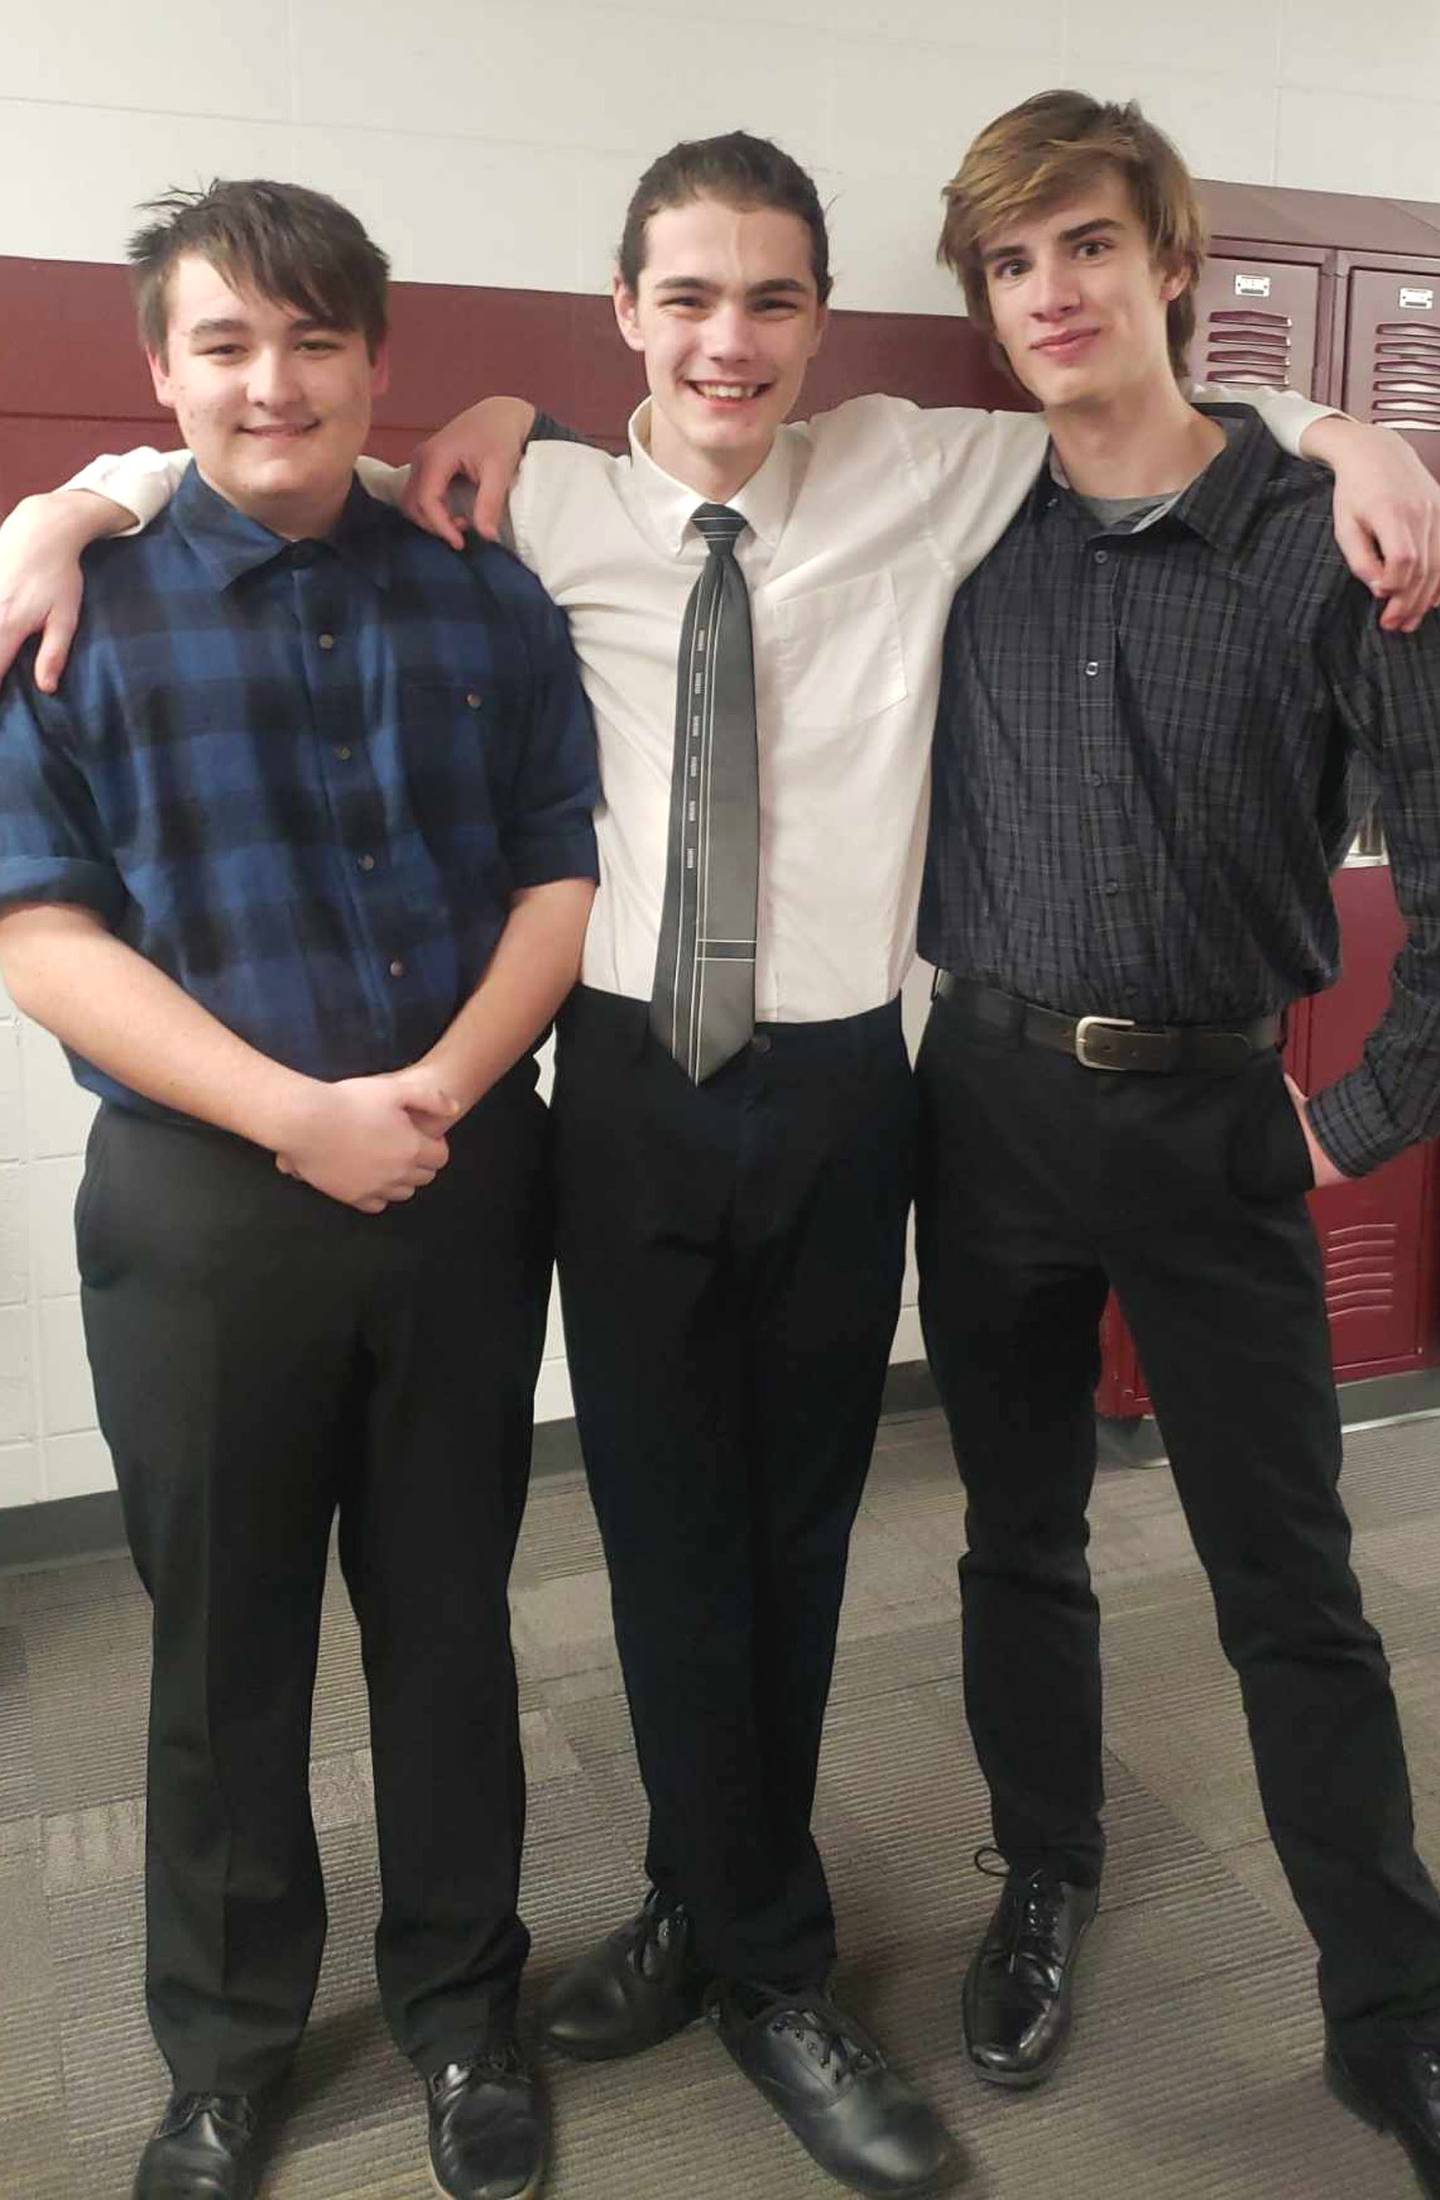 Two of Creston's improv groups will be competing at state on Feb. 17. From left: Malachi Webber, Carson Beer, Wyatt Hitz.